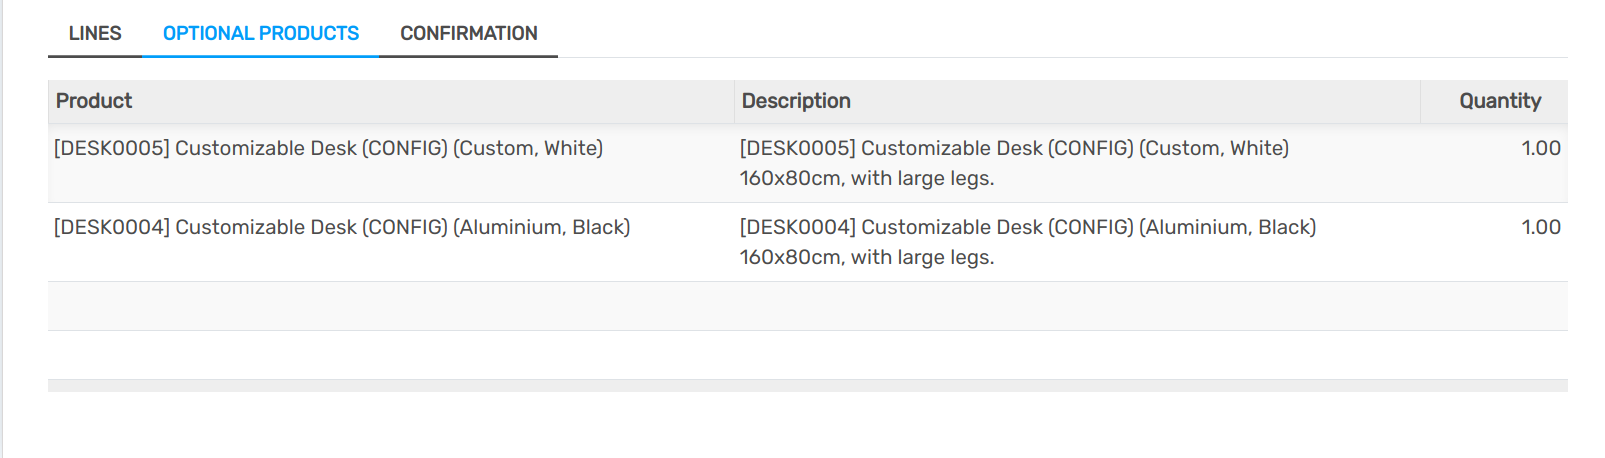 How to add optional products to your quotation templates on Flectra Sales